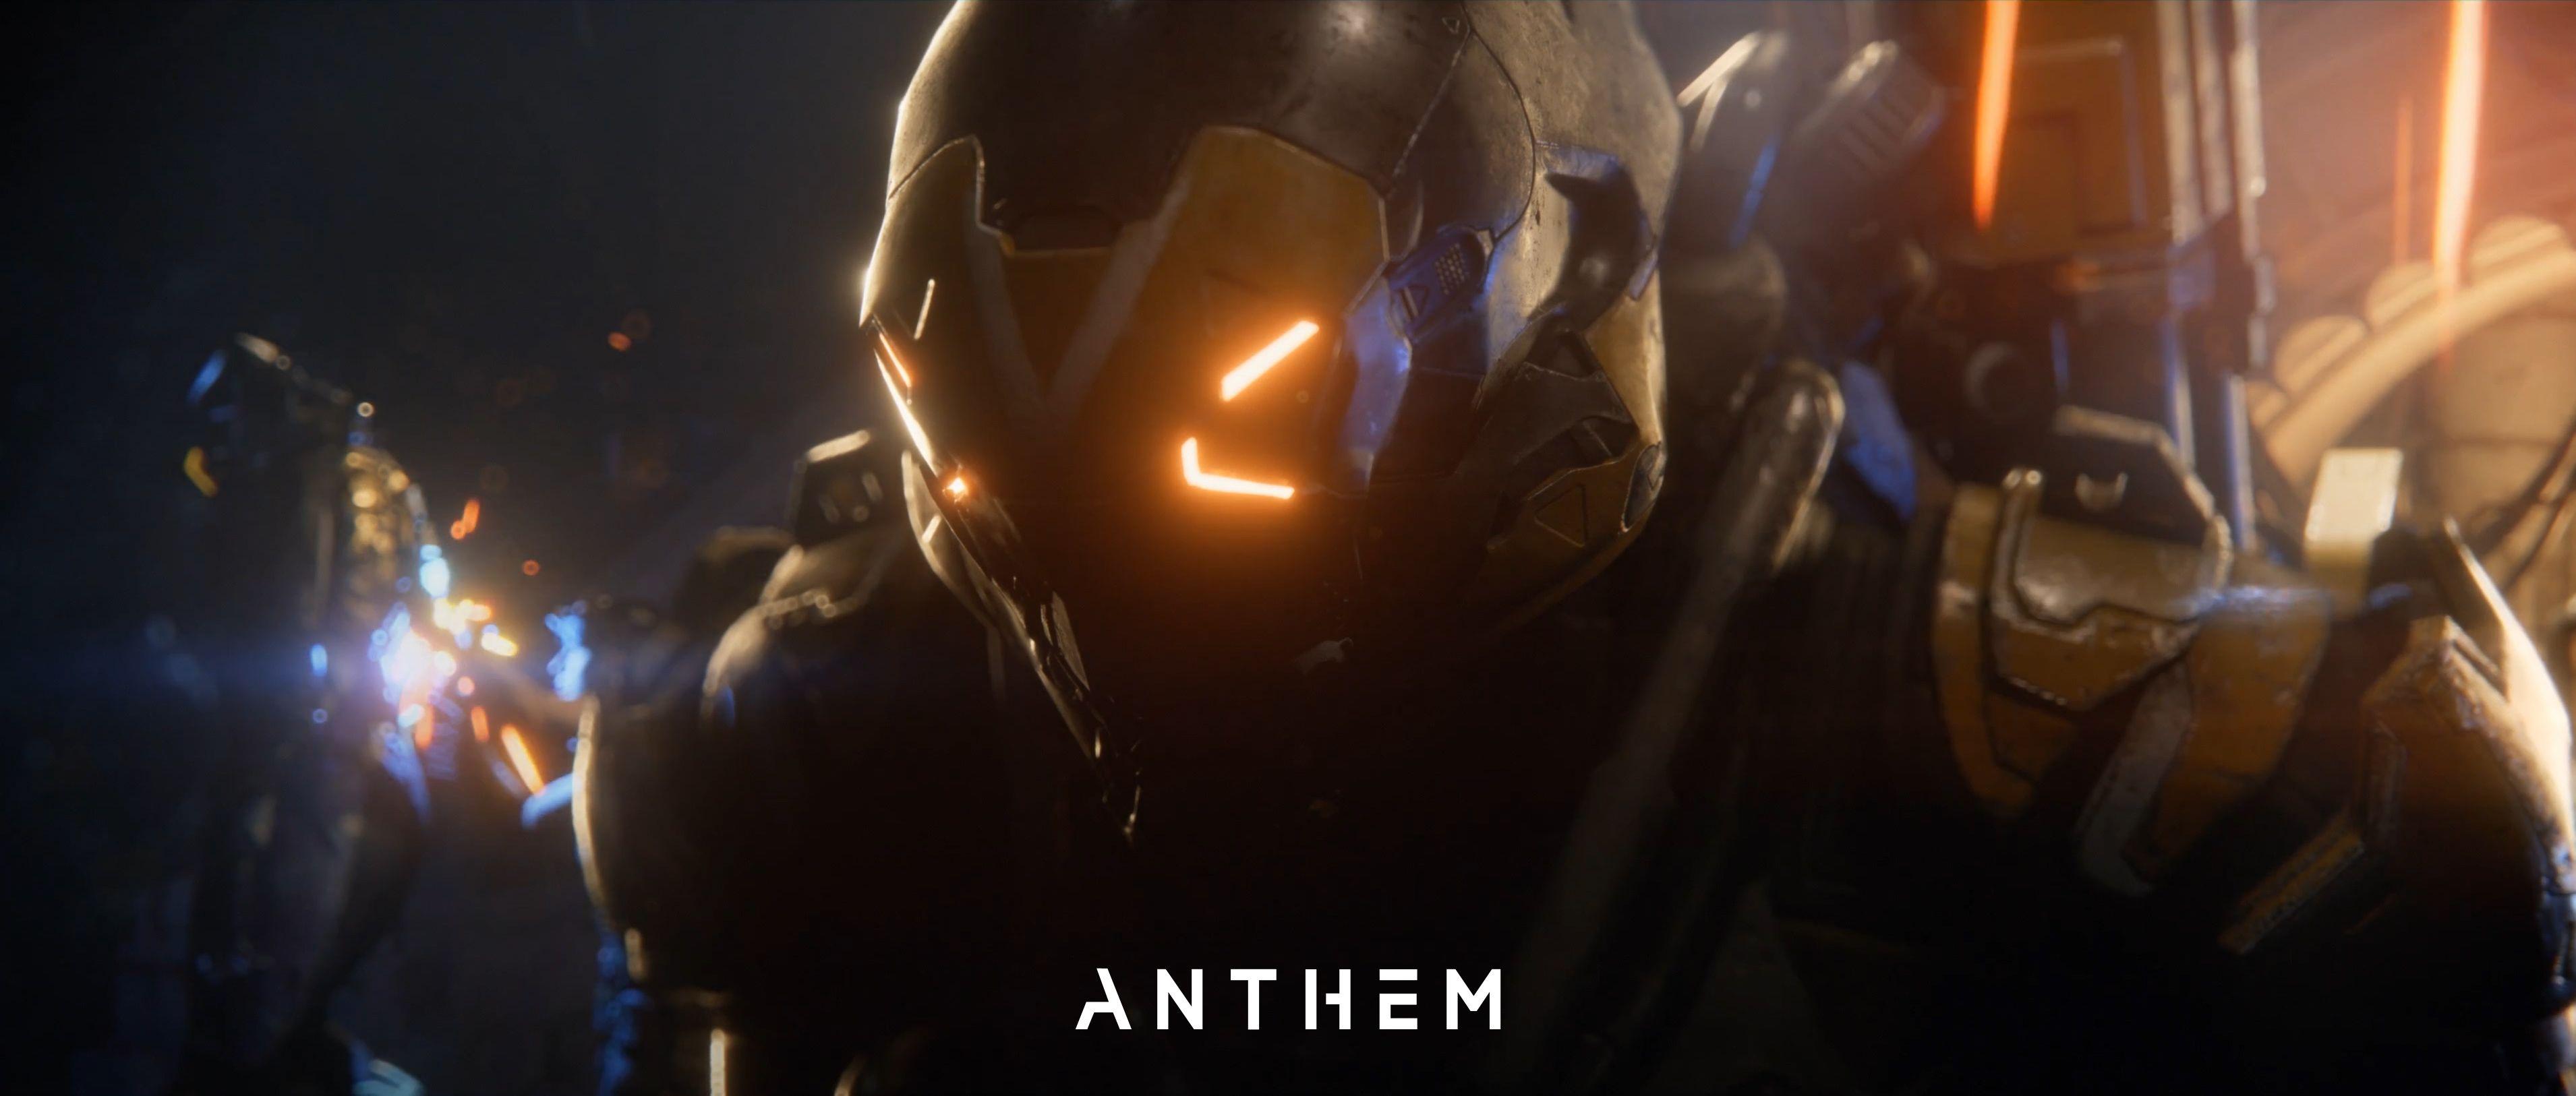 Wallpaper Anthem, Xbox One, PC, PlayStation 4K, Games